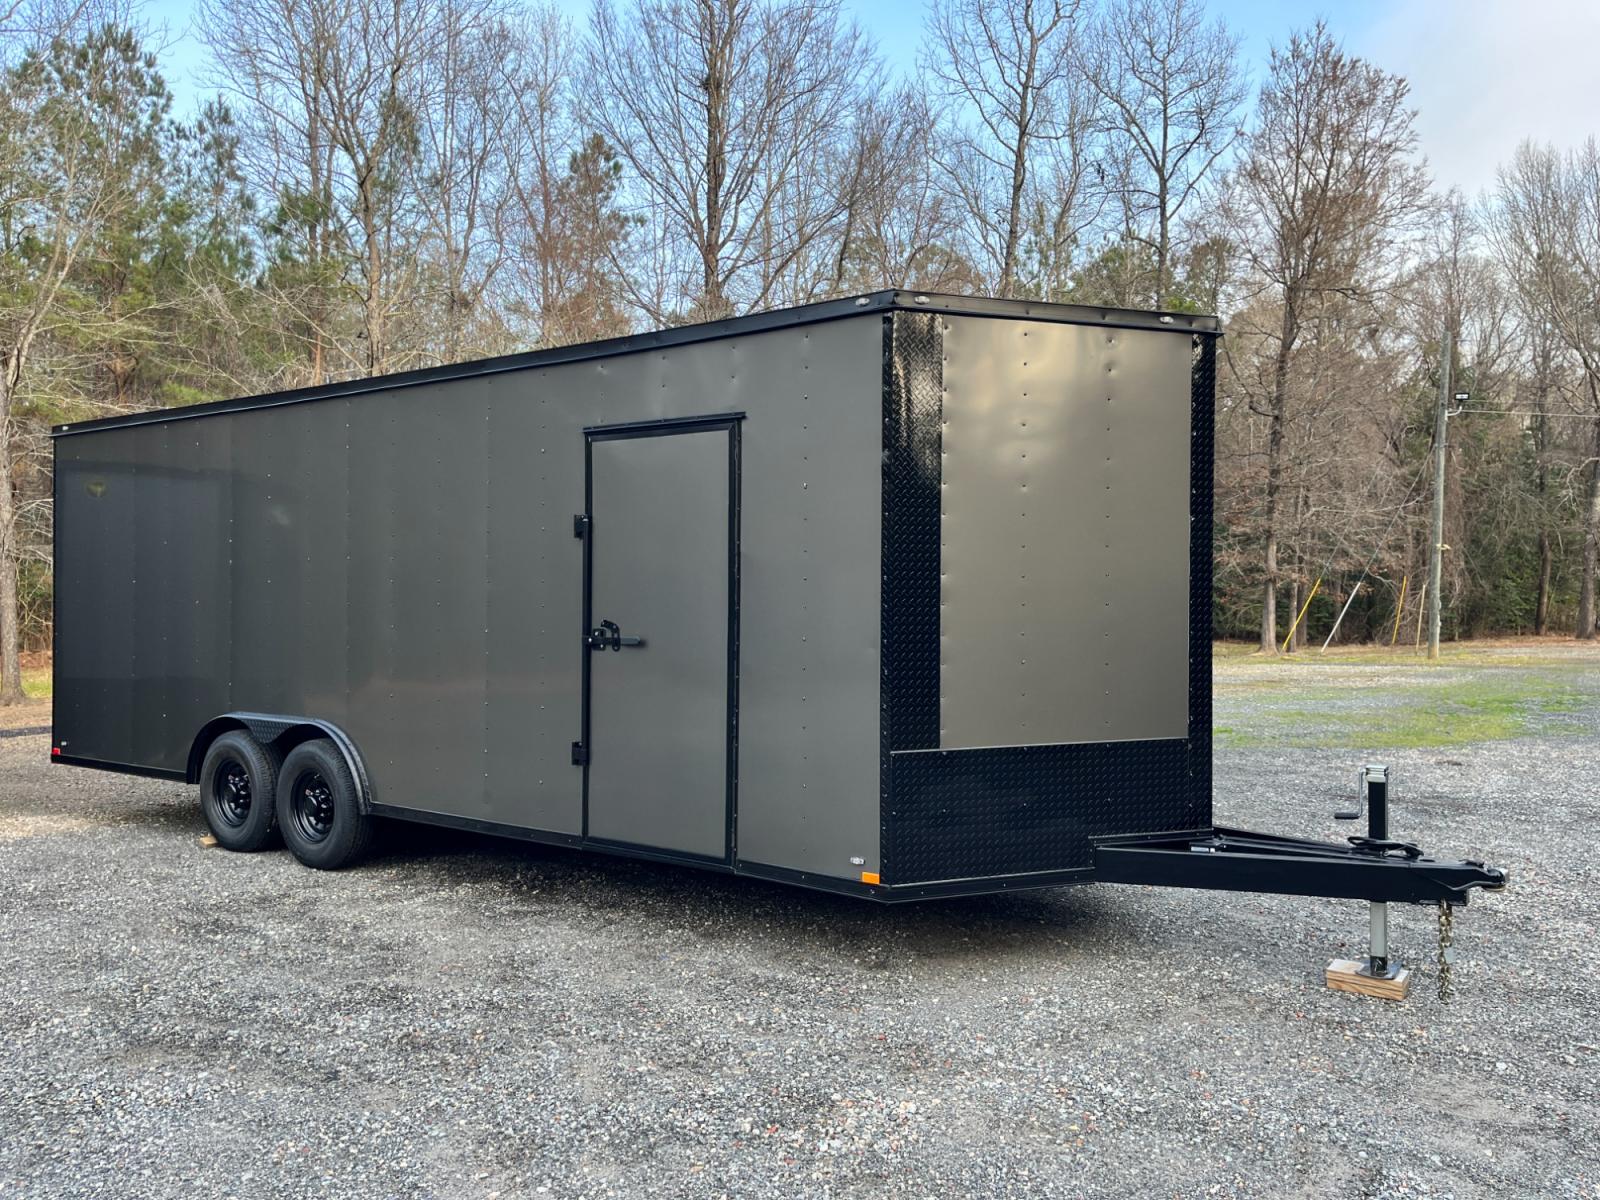 2023 .080 Charcoal Metallic w/Black Out Pkg. Elite Cargo 8.5ft X 24ft Tandem , located at 1330 Rainey Rd., Macon, 31220, (478) 960-1044, 32.845638, -83.778687 - Brand New 2023 Model Elite Cargo Trailer, Made in Tifton, GA 7ft 5" Tall Inside Height This Deluxe Enclosed Car Hauler has Awesome Features! .080 Thick Charcoal Metallic Skin! Awesome "Black Out Trim Package!" 2 Inside LED Dome Lights with Wall Switch! Much Taller Inside, 7ft 5" Tall Inside. Th - Photo #0